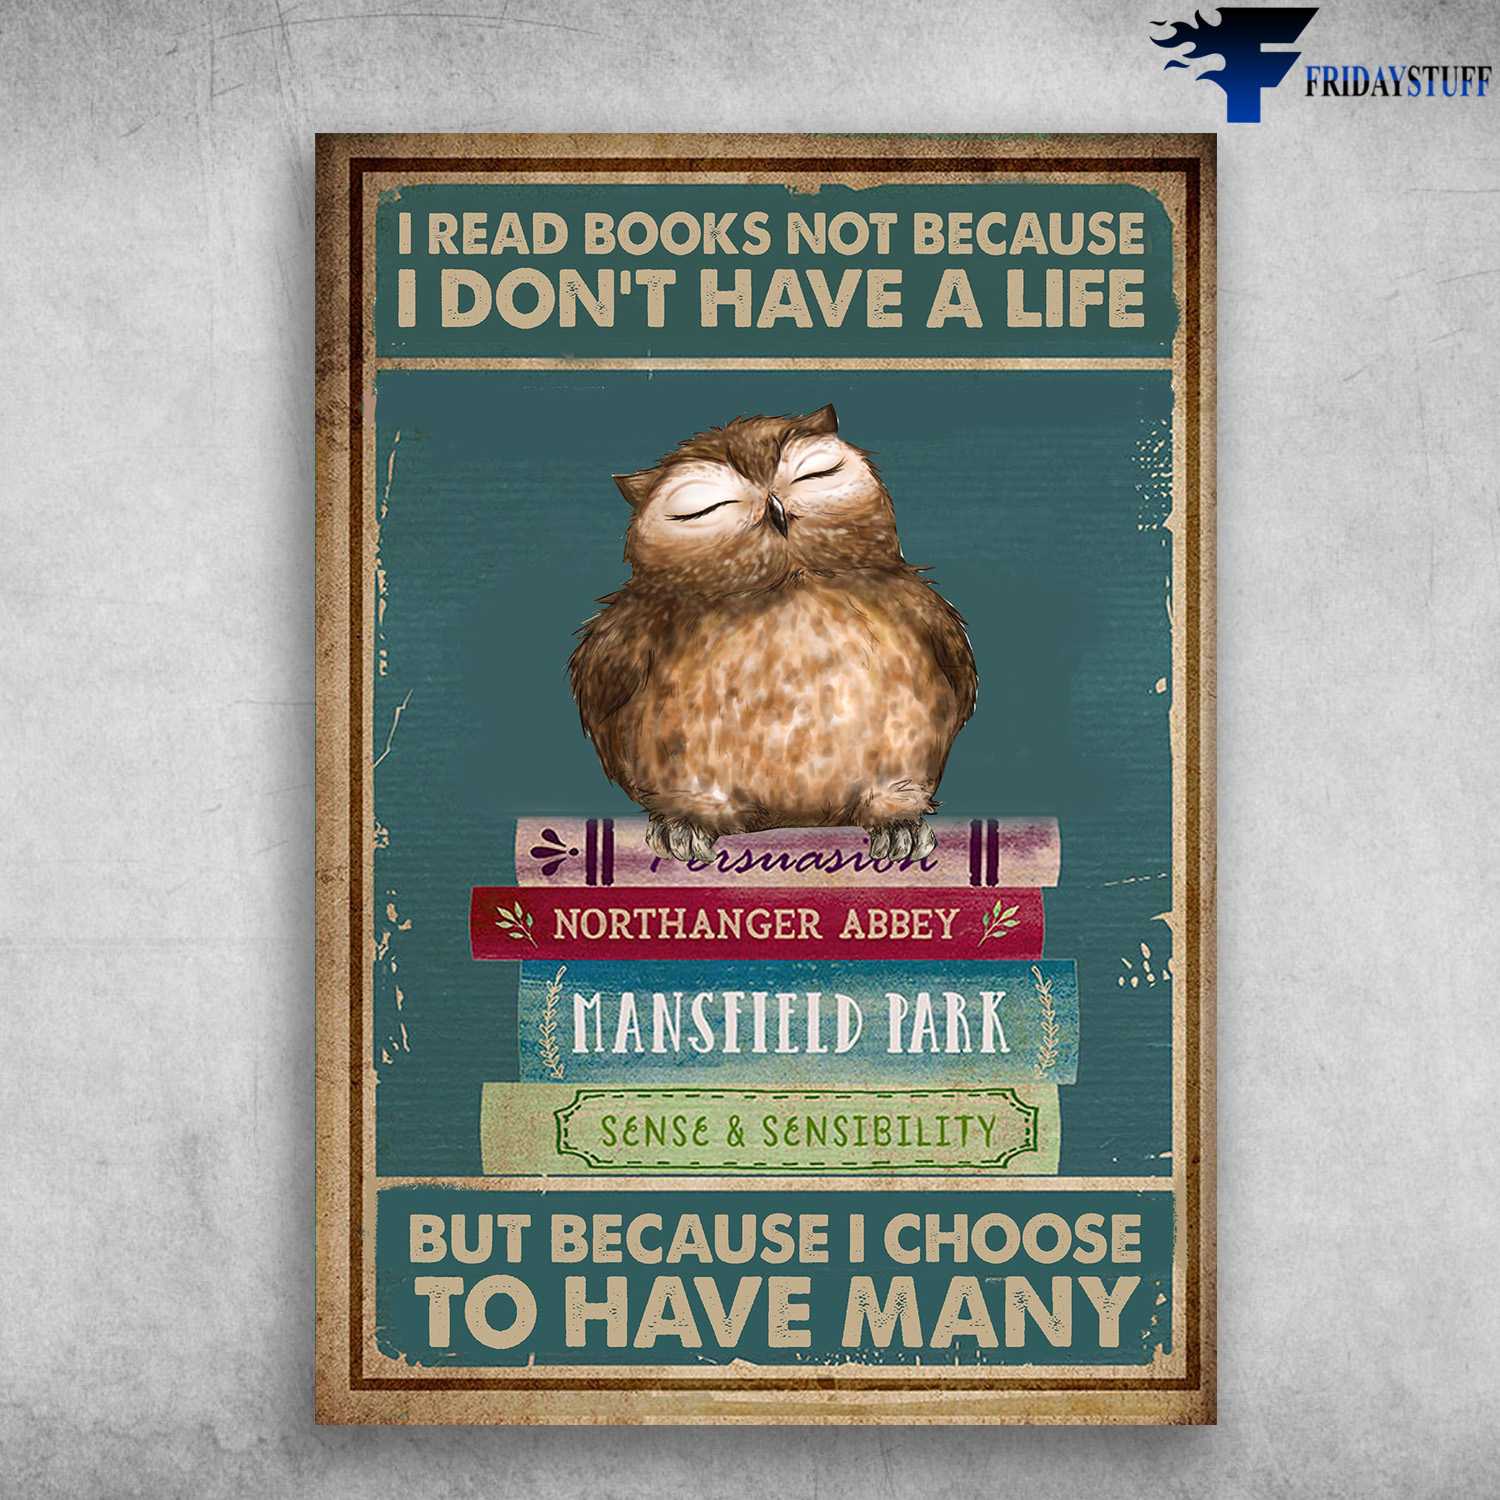 Book Lover, Reader Poster, Owl And Book, I Read Books, Not Because I Don't Have A Life, But Because I Choose Have Many